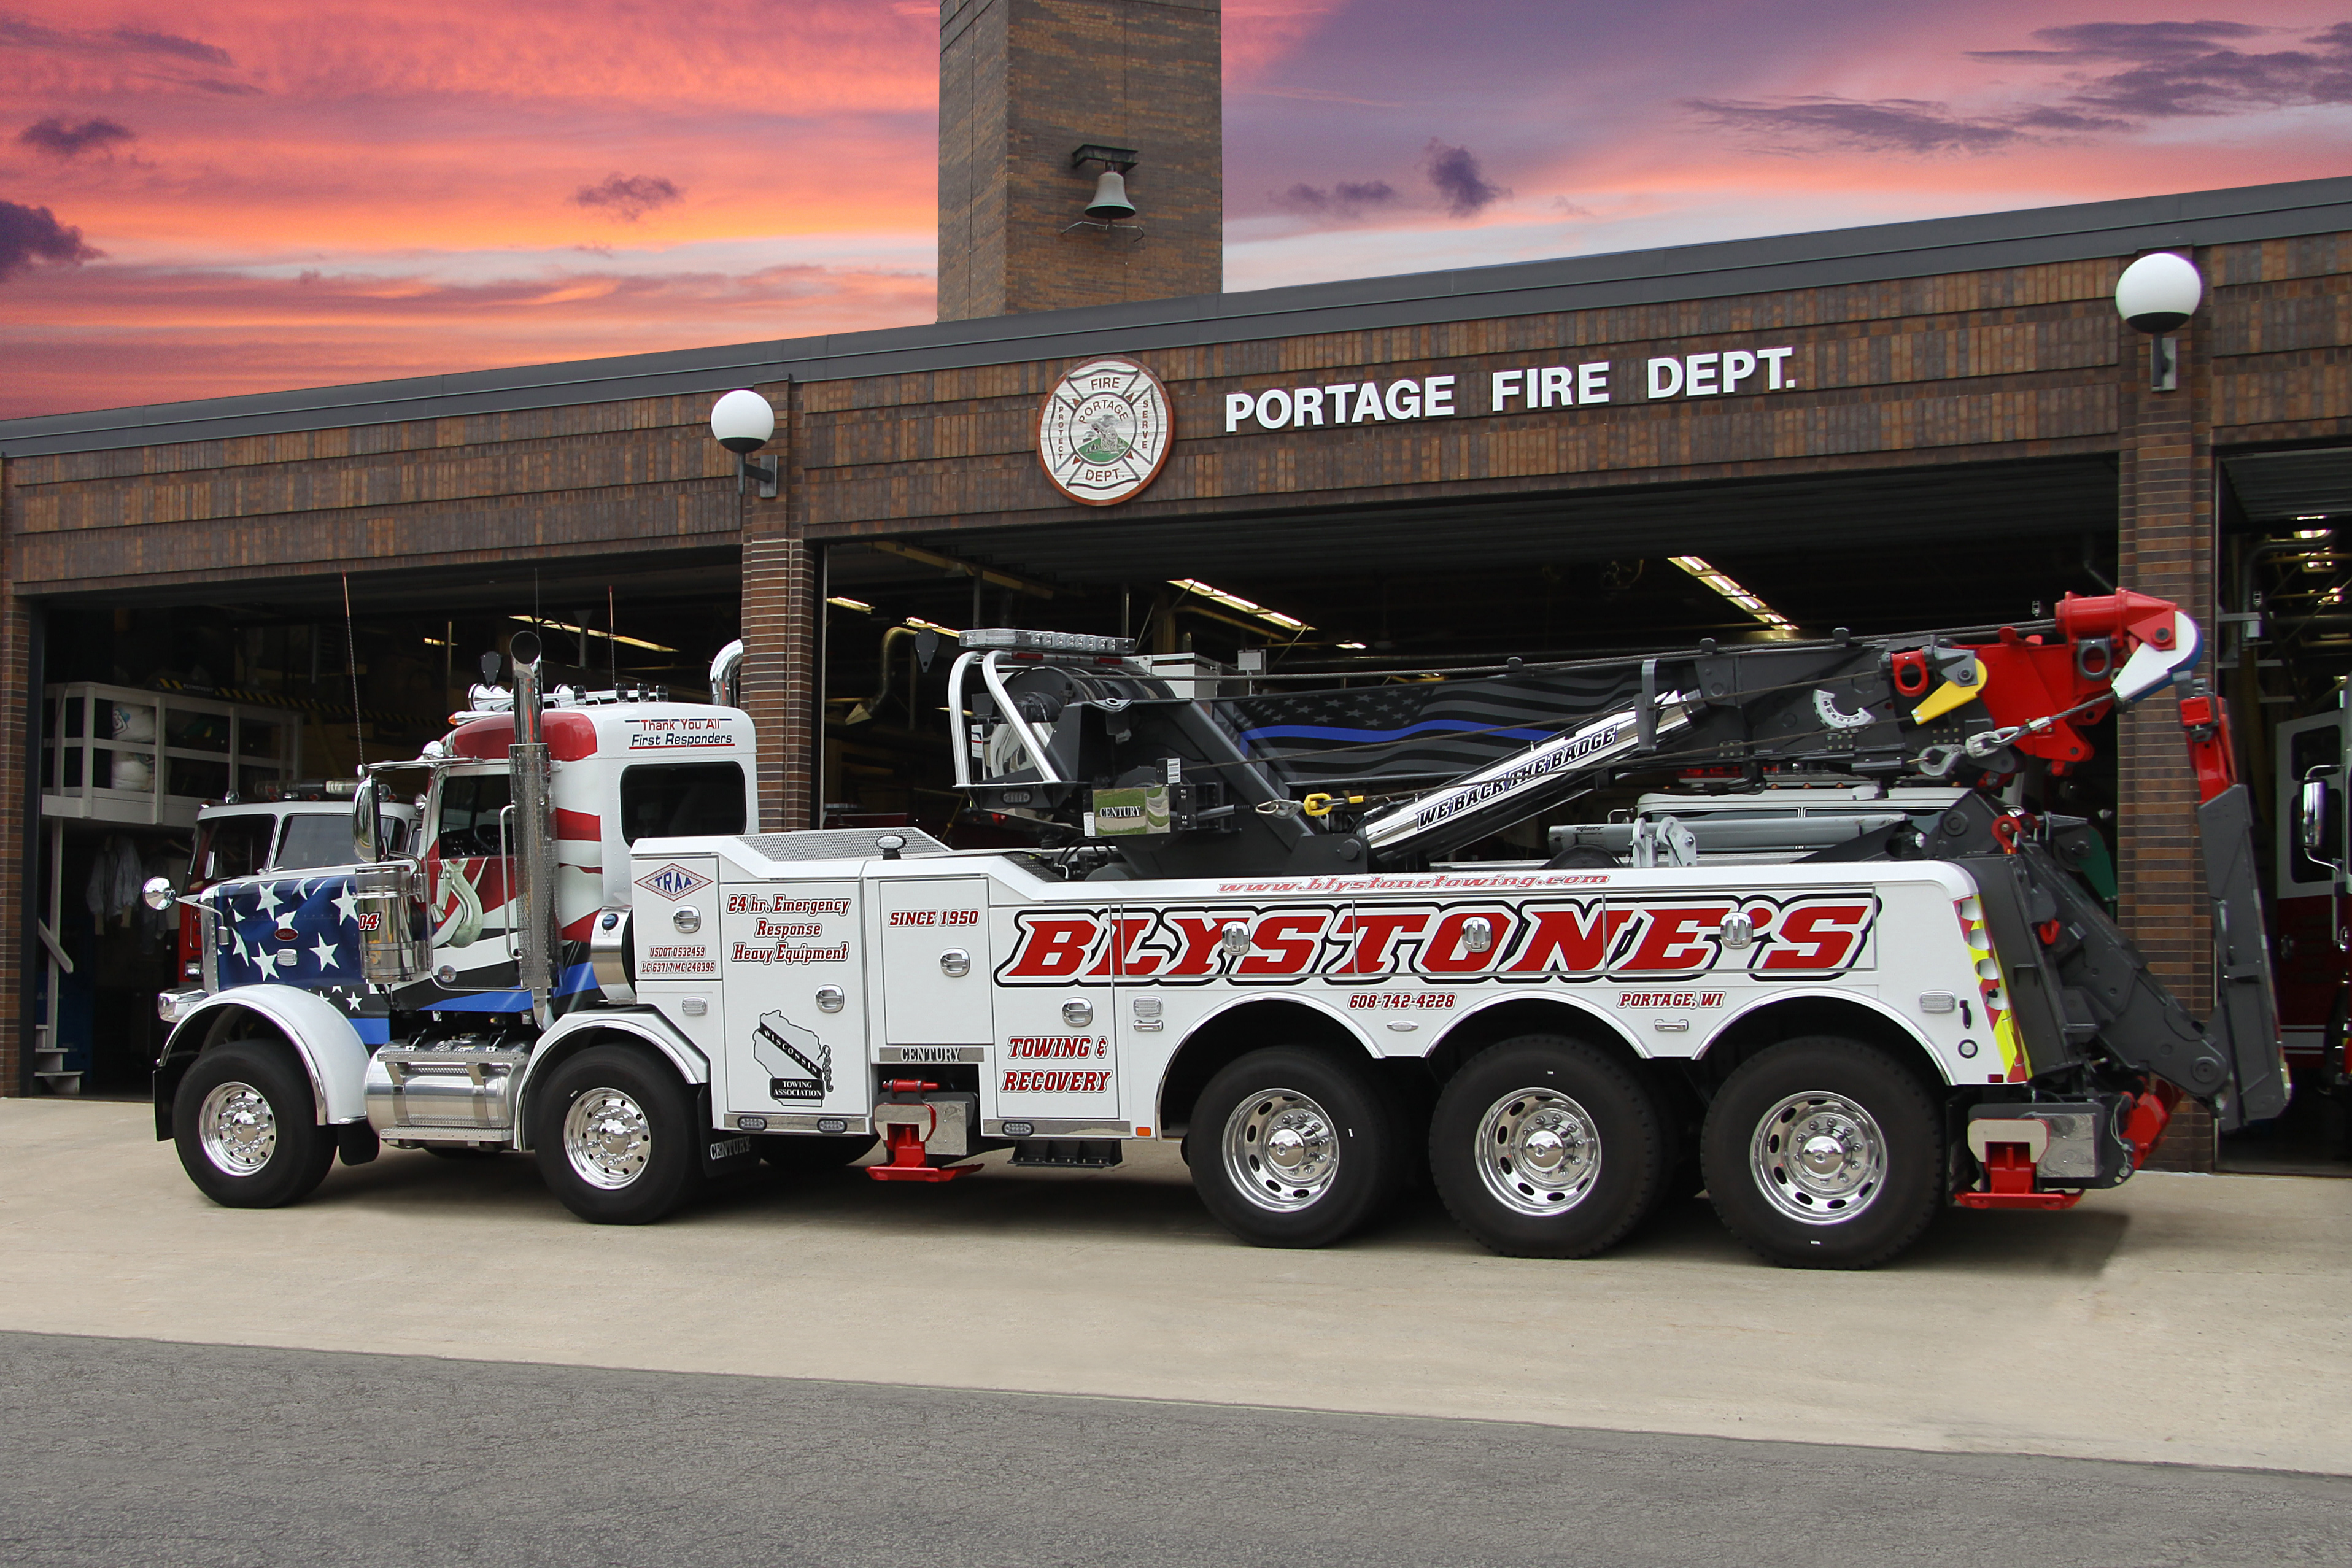 BLYSTONE TOWING AND RECOVERY Towing.com Profile Banner